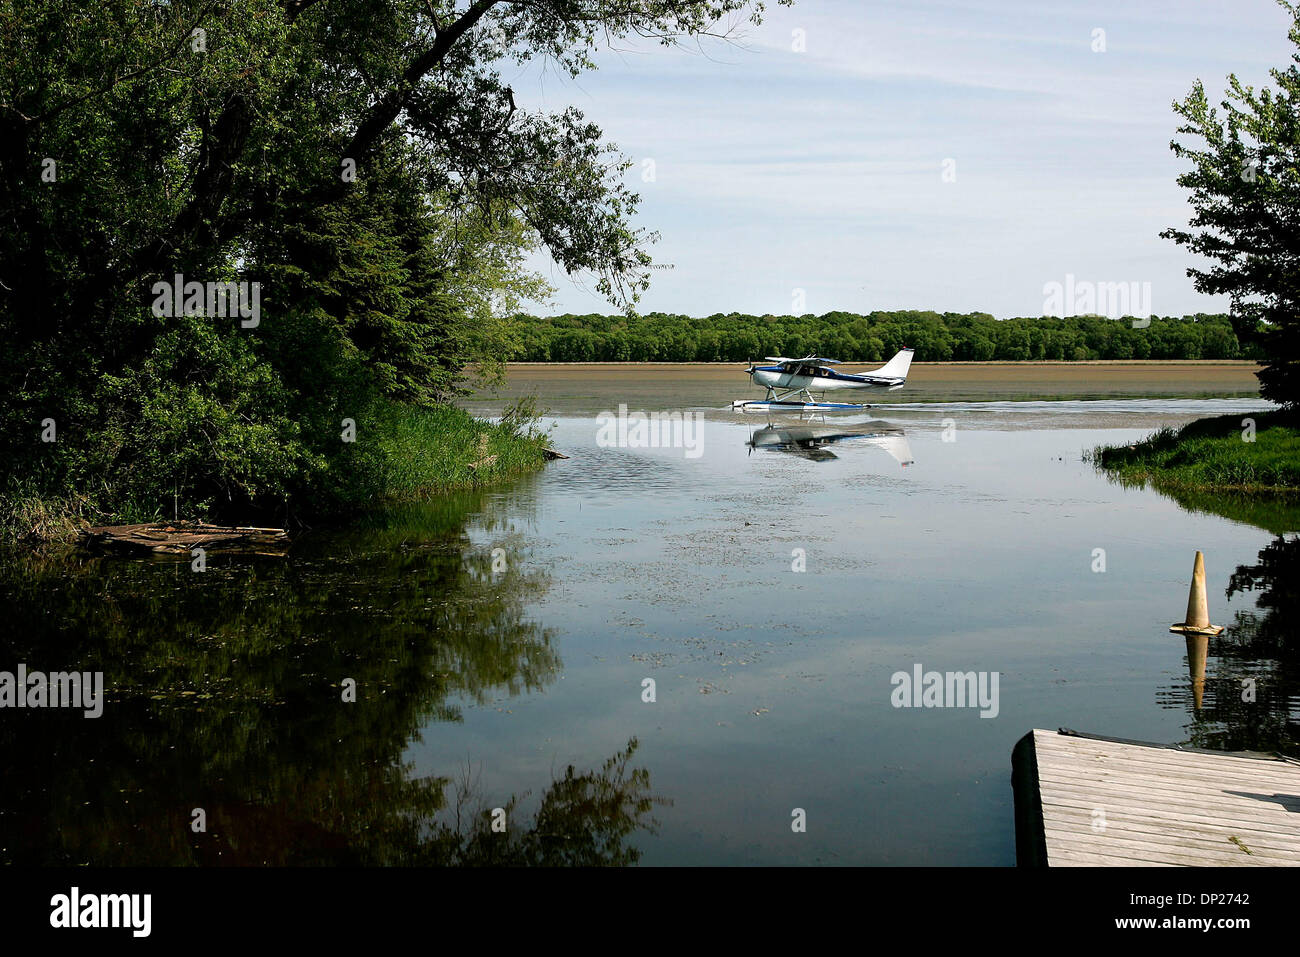 May 19, 2006; Lino Lakes, MN, USA; Bruce Hanson is the owner of Surfside  Seaplane Base in Lino Lakes, Minn., May 19, 2006. Hanson began as a  co-owner of the 30 acres